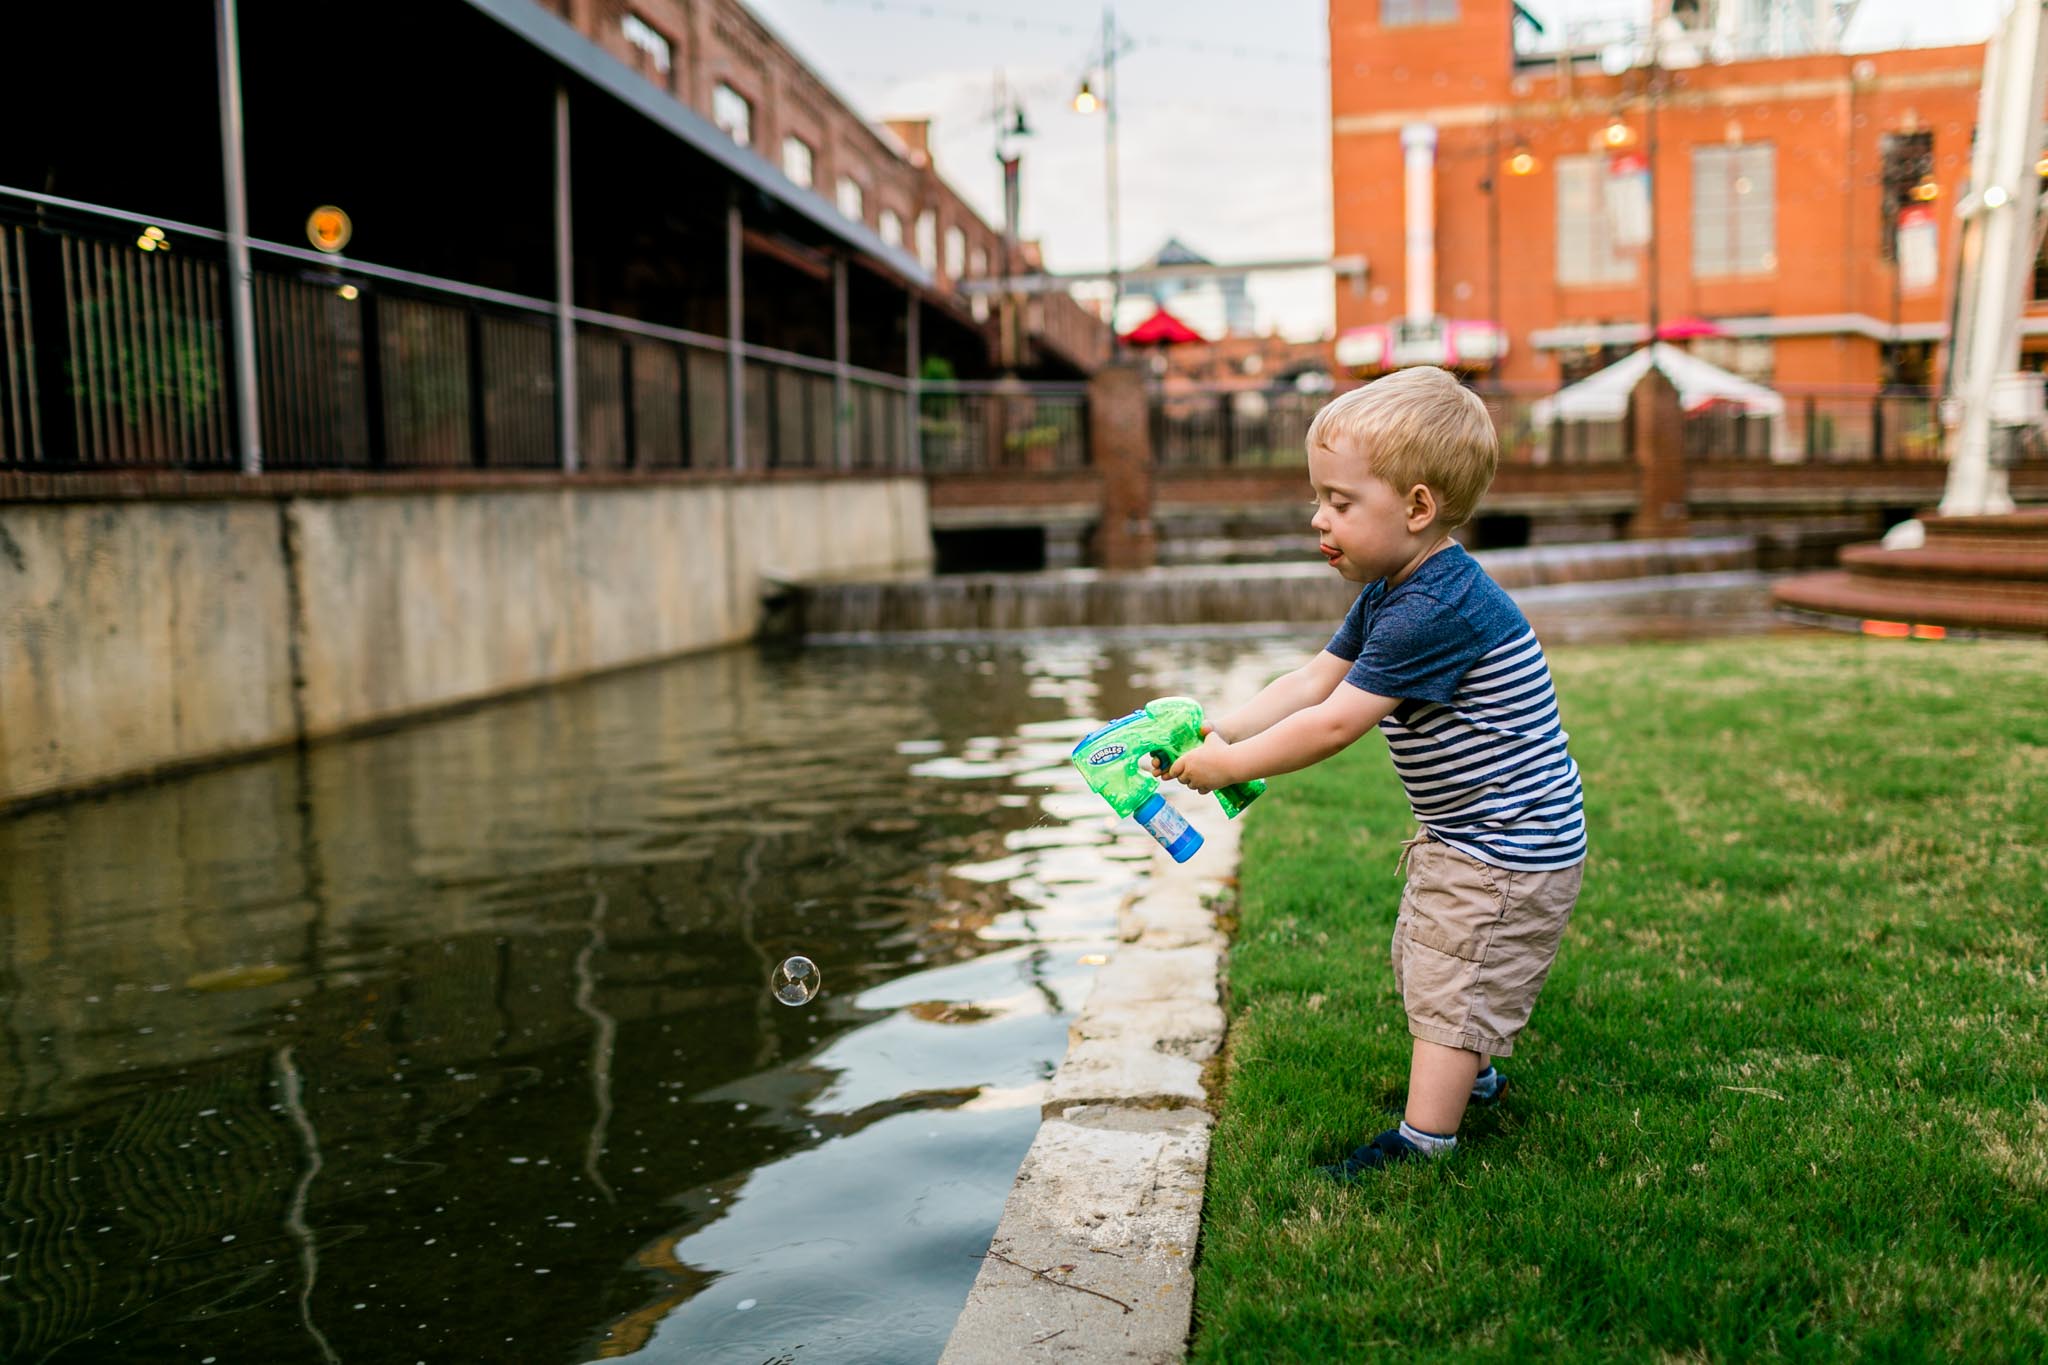 Durham Family and Children Photographer | Boy spraying bubbles | By G. Lin Photography